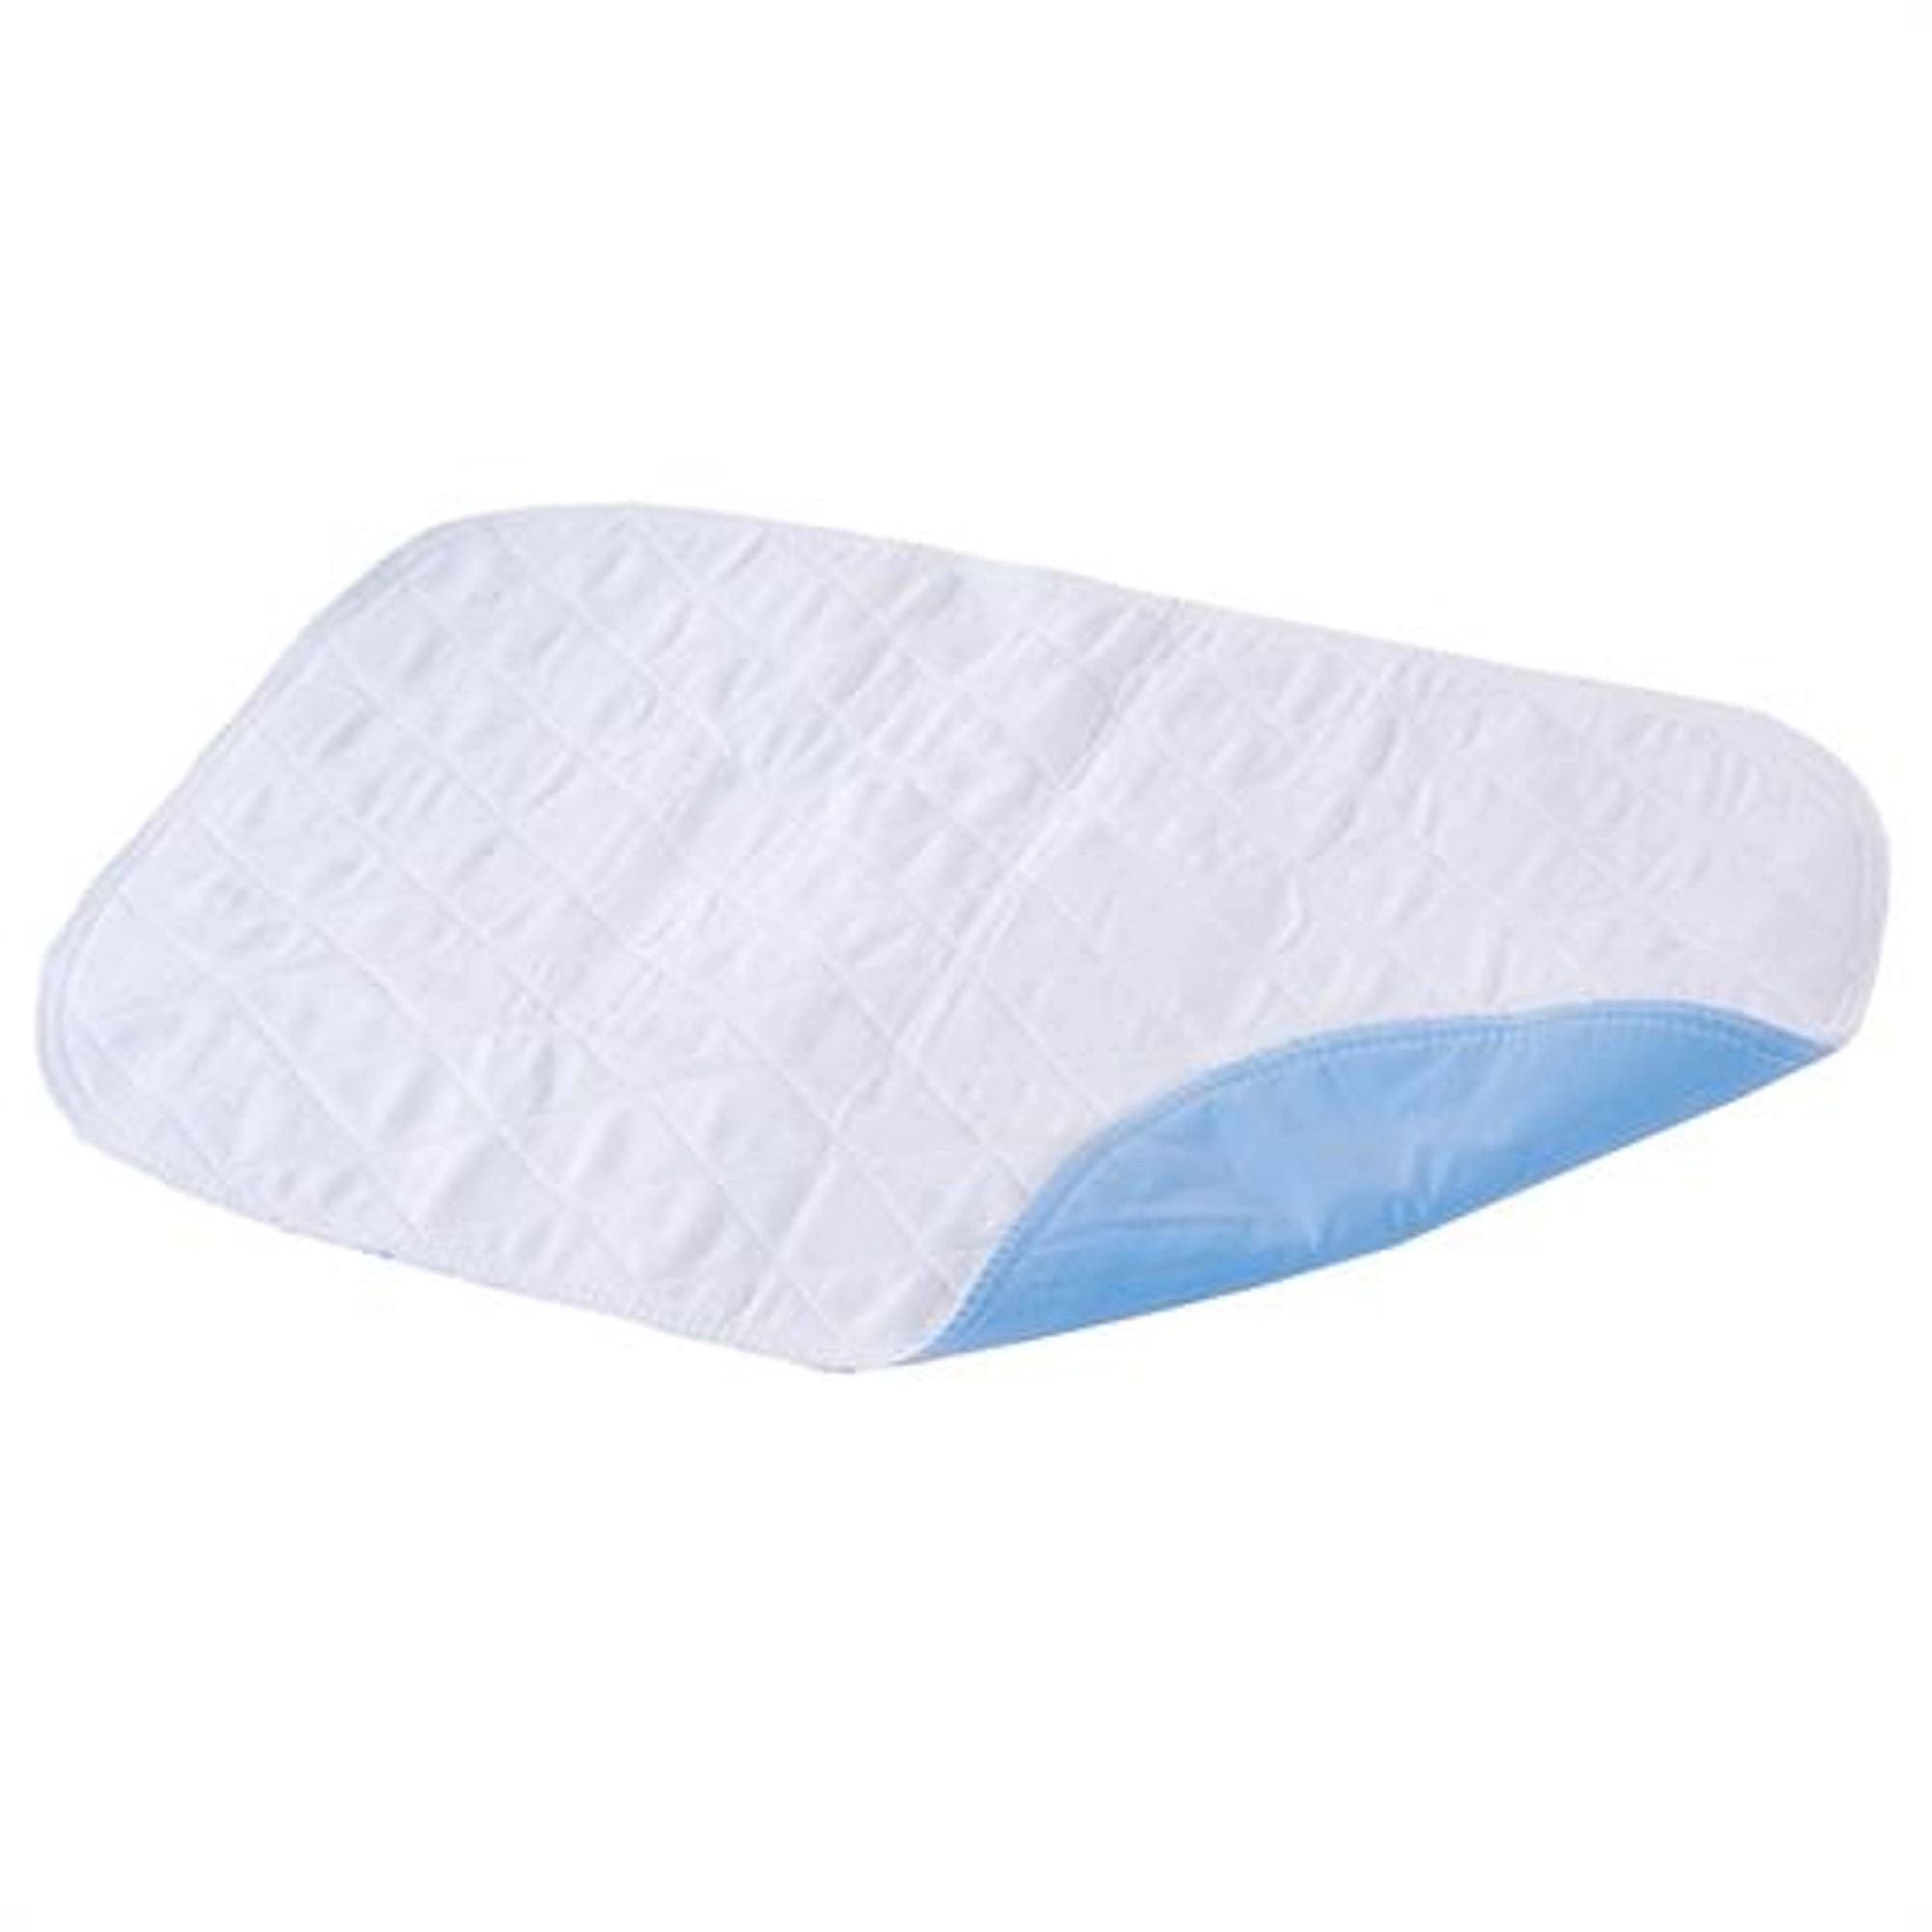 Essential Medical Supply Quik Sorb Underpad - 36" x 54", Quilted, Birdseye, Reusable